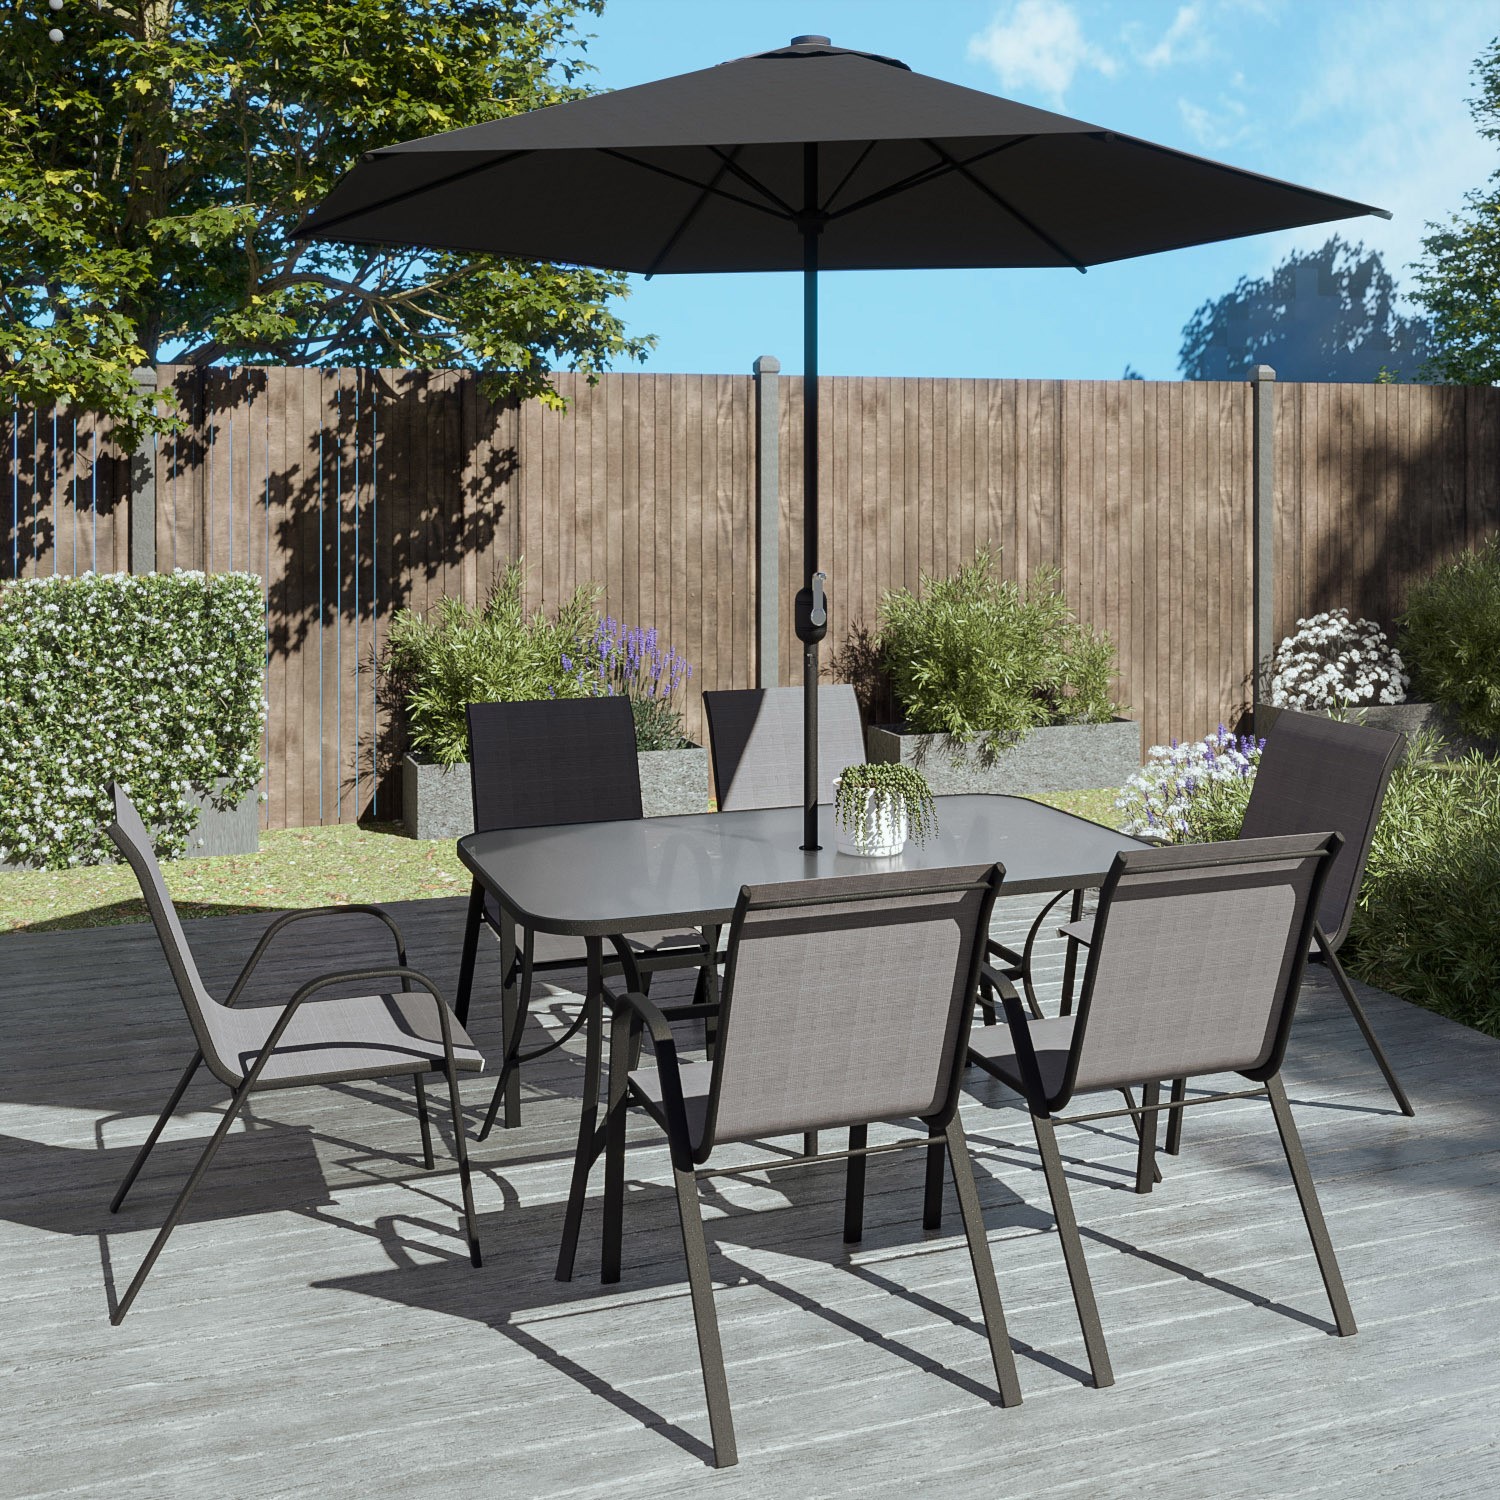 6 Seater Grey Metal Stackable Garden Dining Set with Free Parasol and Base - Fortrose FTR008 5056096046564.0